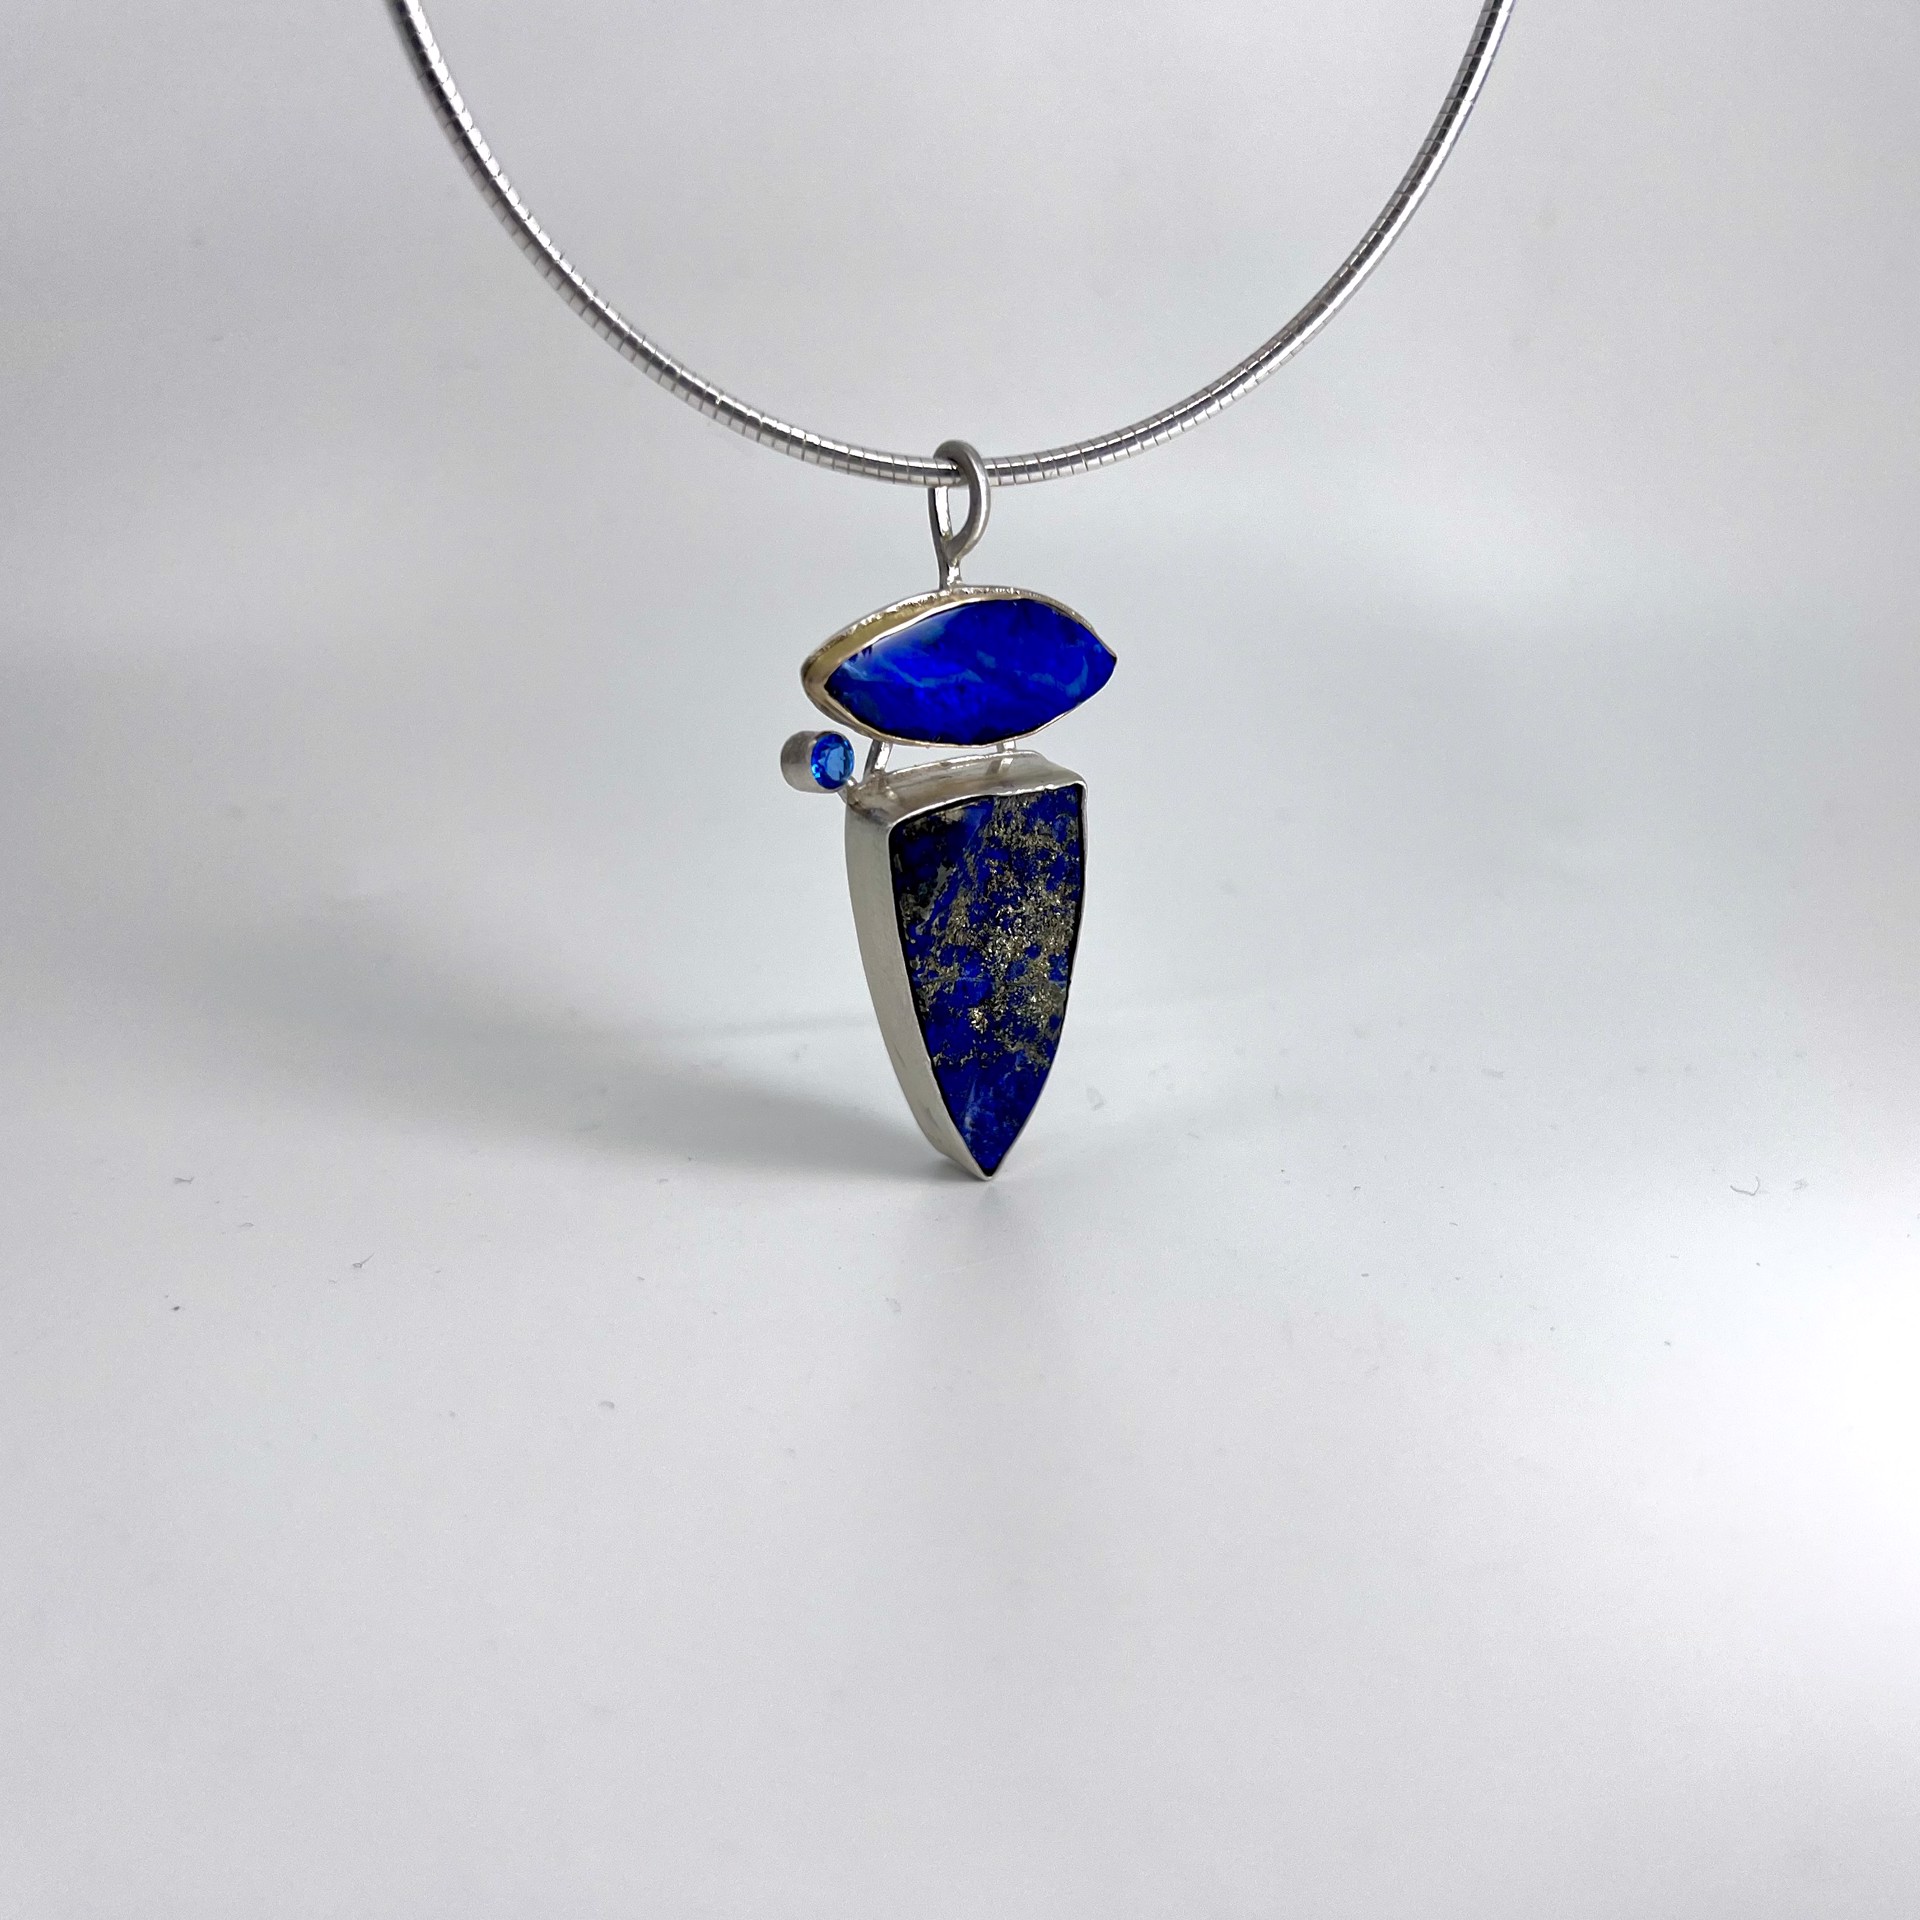 9076 Opal Doublet Set in 22k Gold W/ Lapis and Topaz Set in Sterling Silver by Suzanne Brown